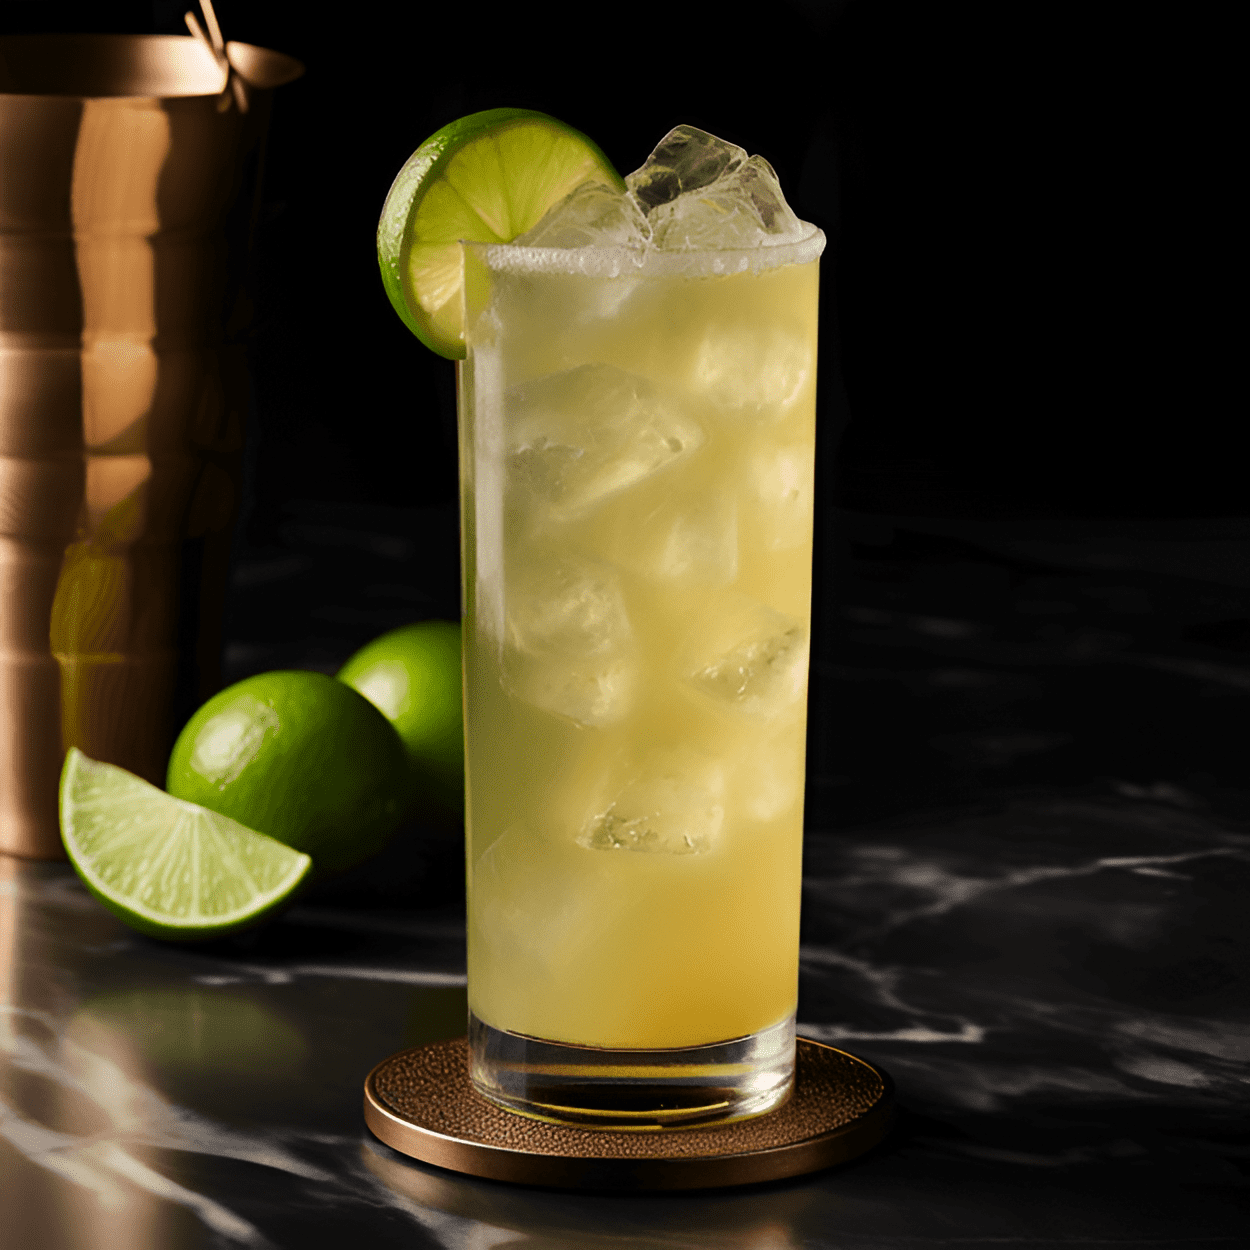 Orgeat Cocktail Recipe - The Orgeat Cocktail is a harmonious blend of sweet, sour, and nutty flavors. The almond syrup provides a rich, sweet base, while the lime juice adds a tangy kick. The rum adds a strong, warming undertone that balances the sweetness and sourness of the other ingredients.